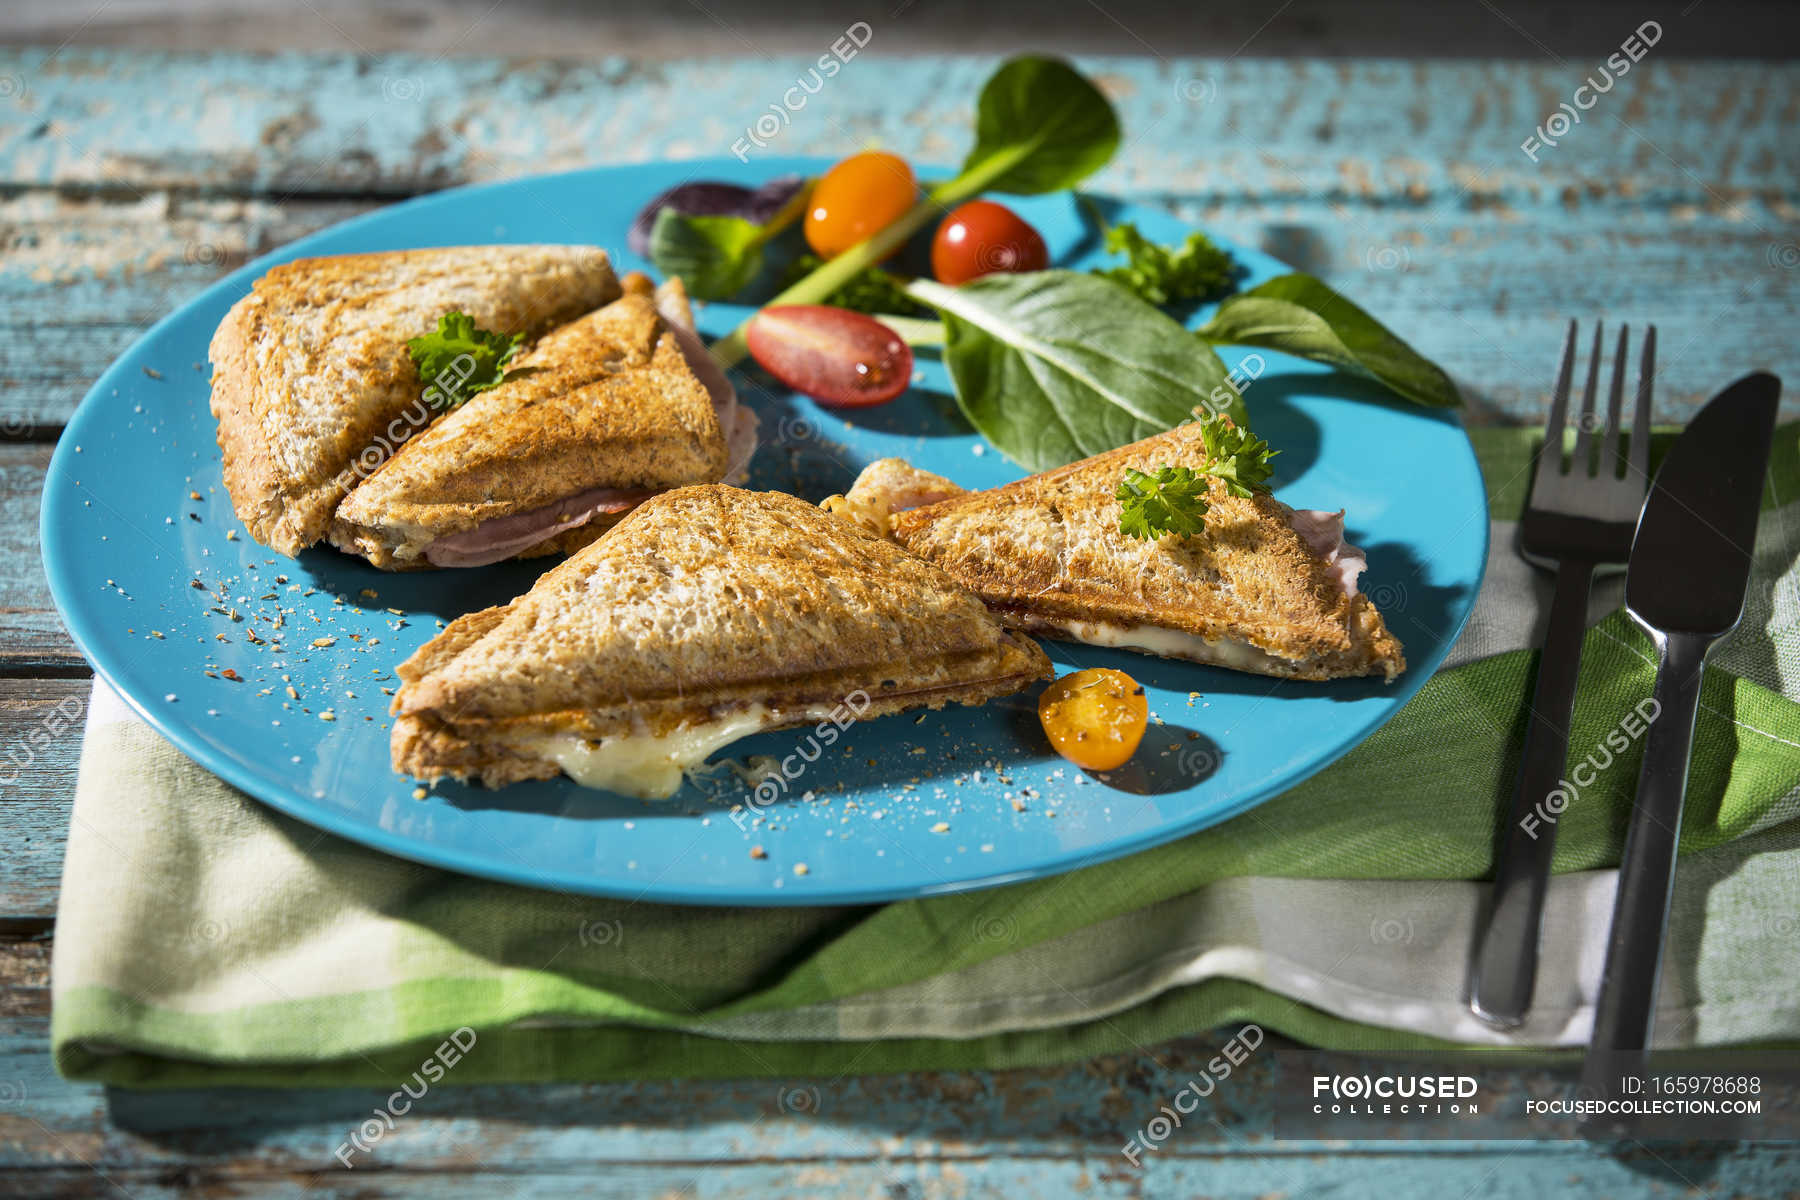 Whole meal sandwich — hearty, freshness - Stock Photo | #165978688